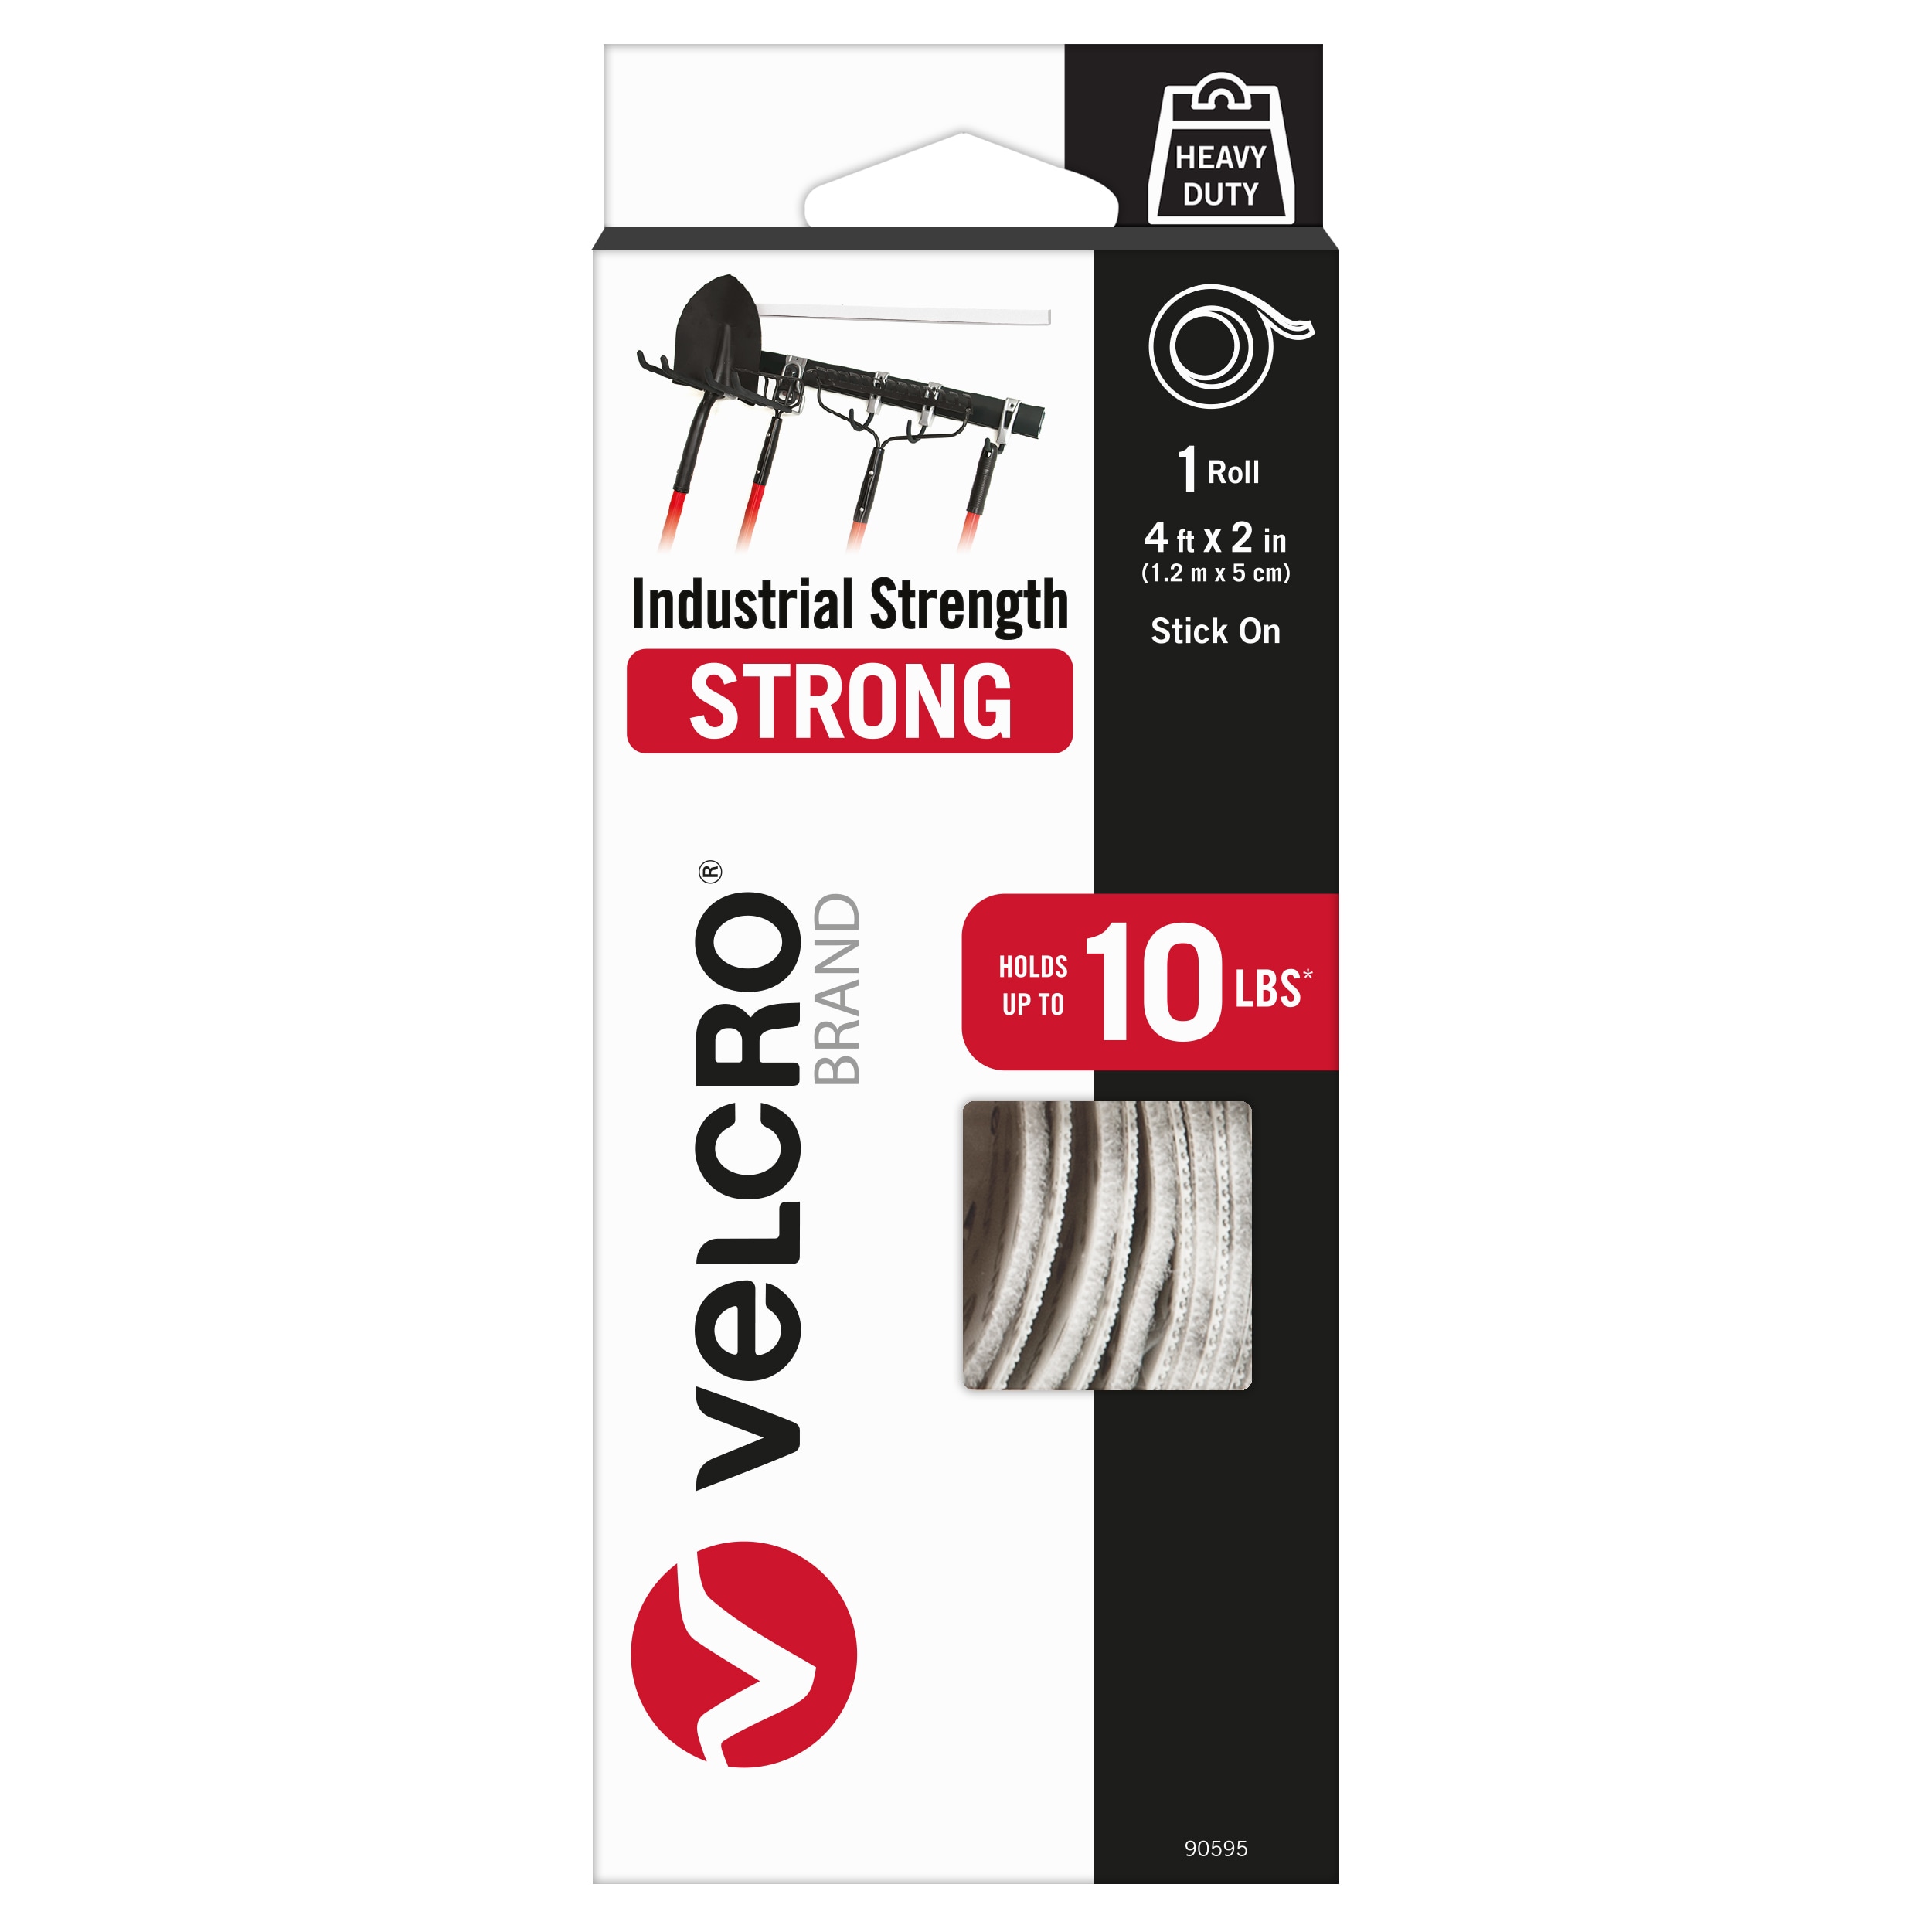 VELCRO Brand Industrial Strength 4ft x 2in White Hook and Loop Fastener  Roll - Water Resistant Adhesive, Heavy Duty, Versatile in the Specialty  Fasteners & Fastener Kits department at